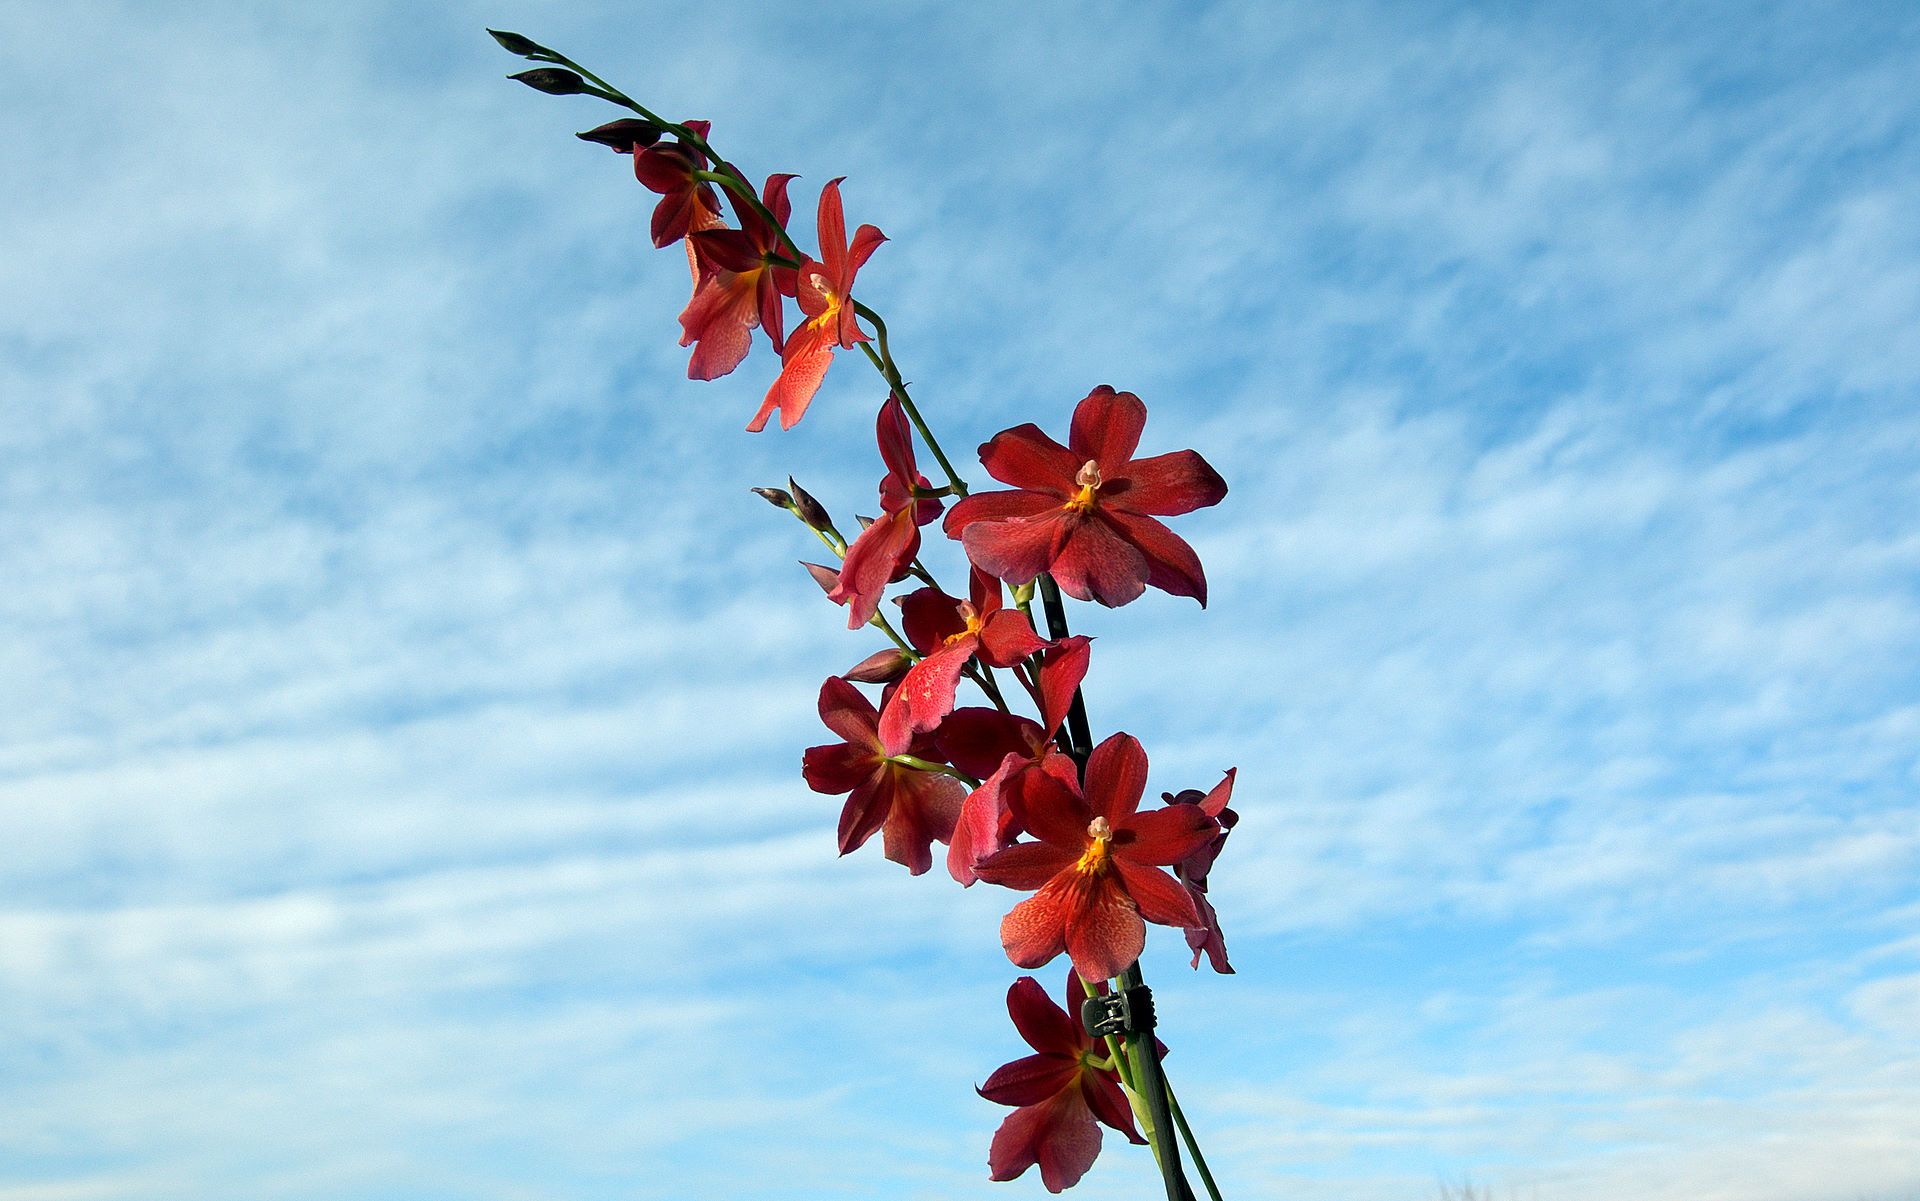 cambria orchid against a blue sky | Cambria-like orchid | Pinterest ...